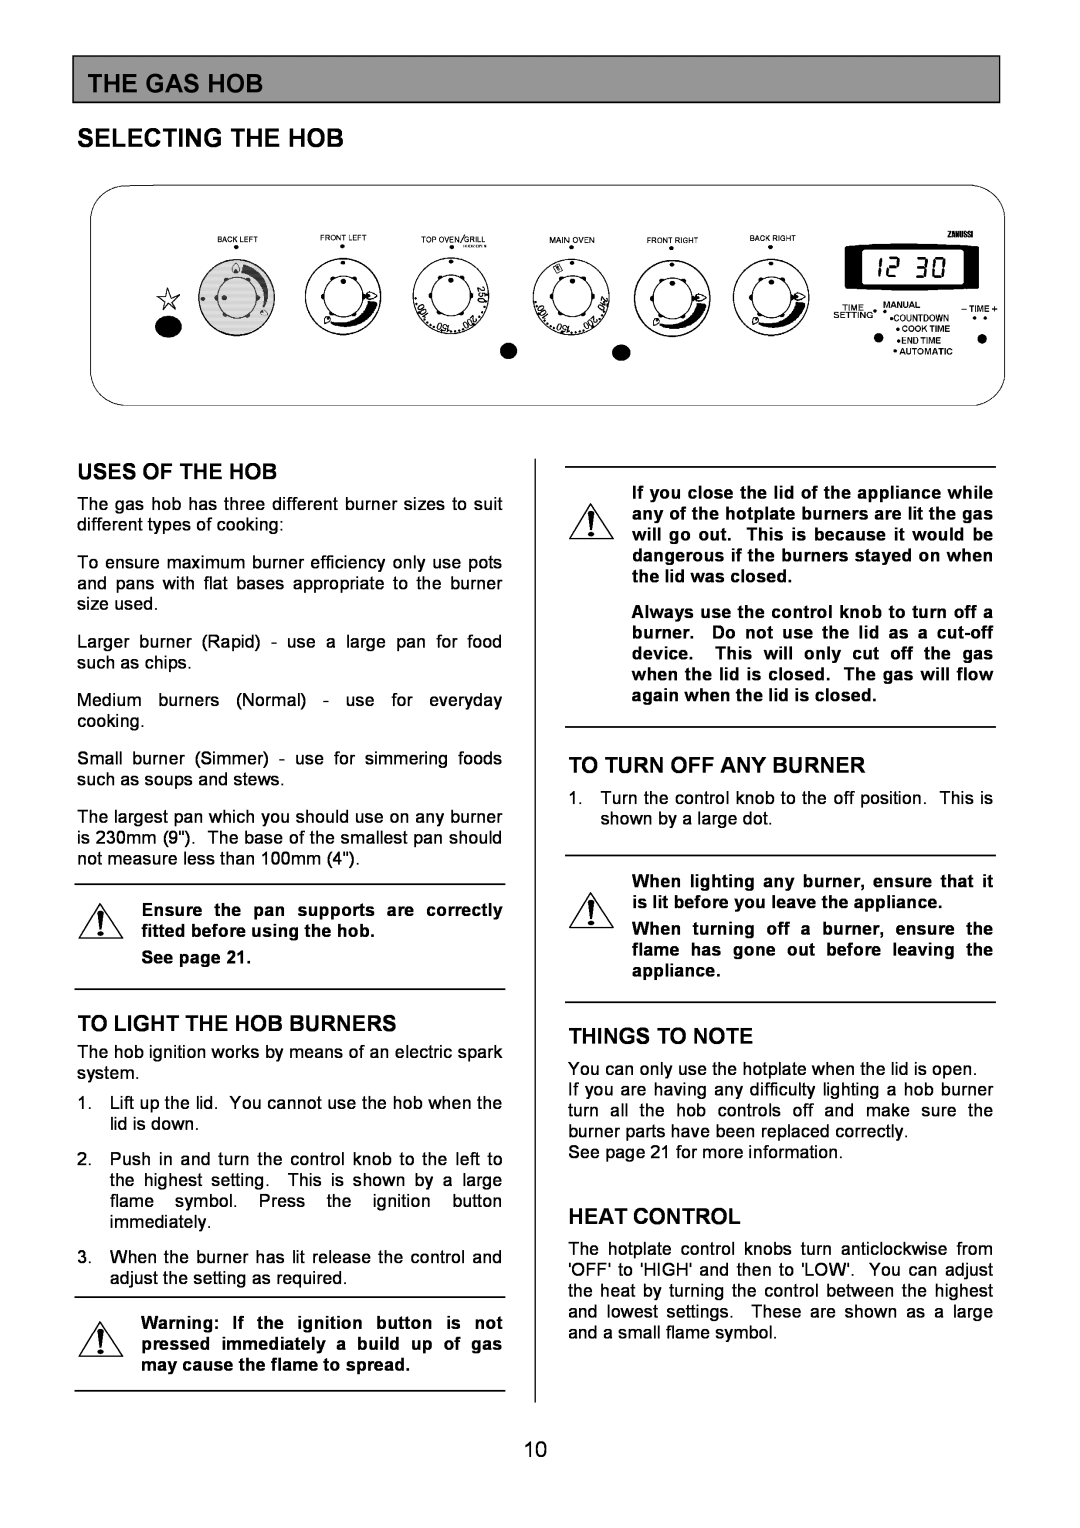 Zanussi ZCM 7901 manual The Gas Hob Selecting The Hob, Uses Of The Hob, To Light The Hob Burners, To Turn Off Any Burner 